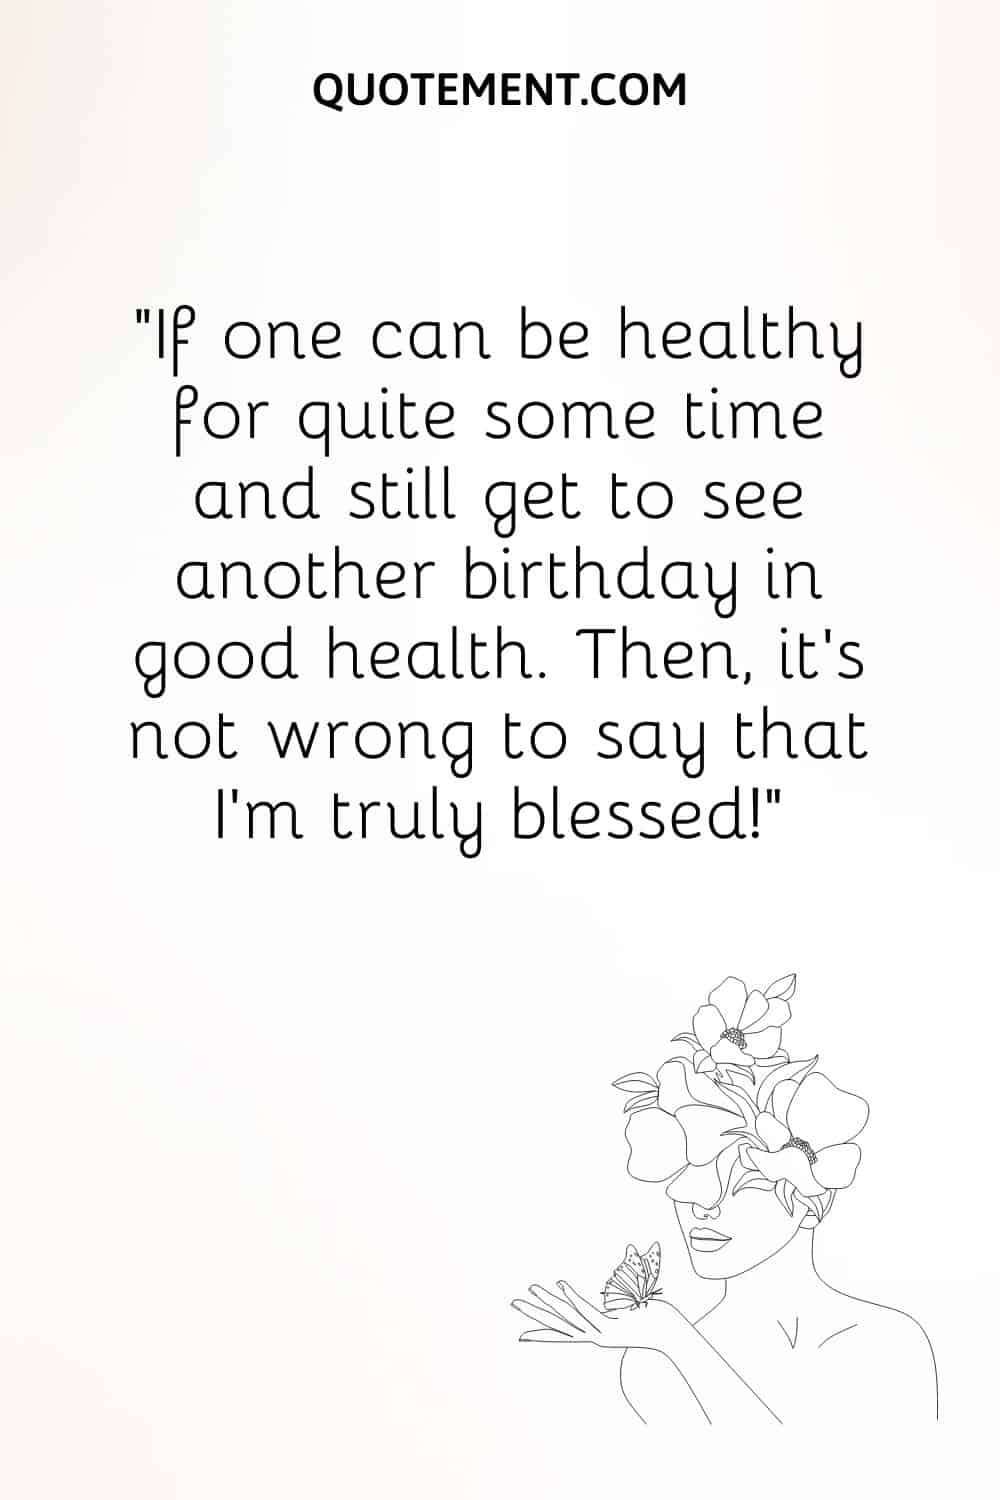 If one can be healthy for quite some time and still get to see another birthday in good health